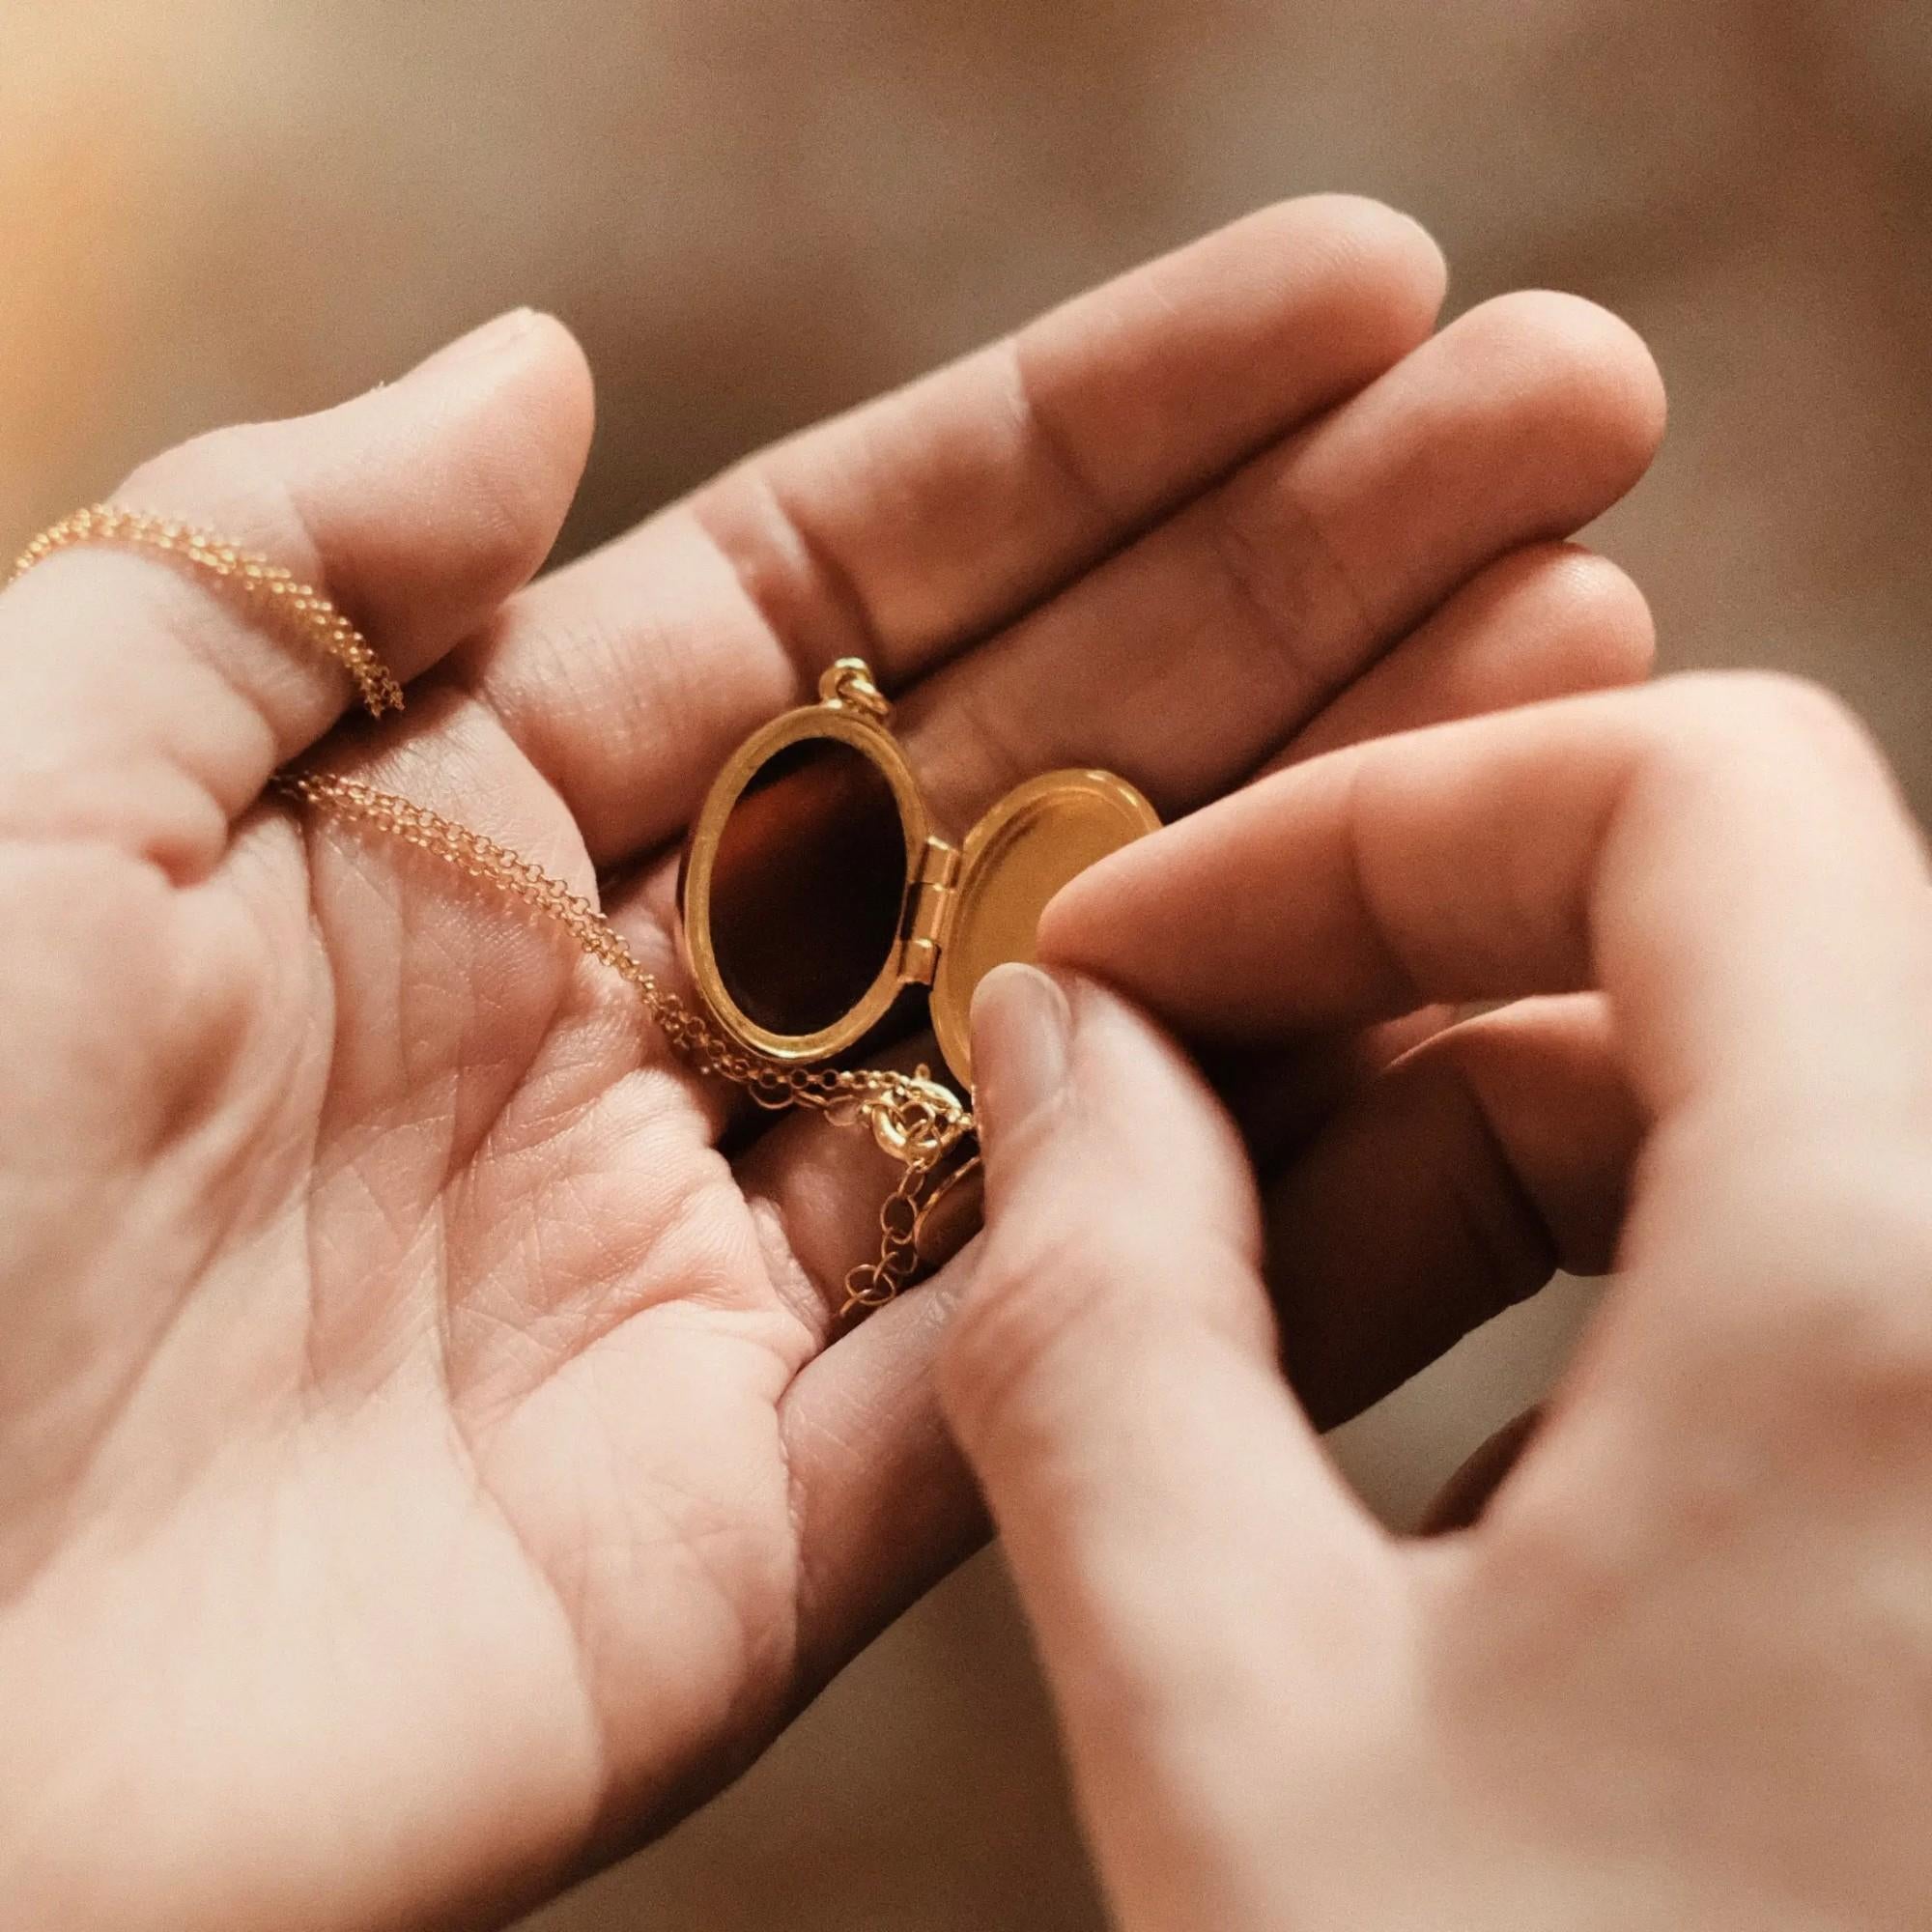 We have prepared for you a minimalist amber locket. It's our interpretation of traditional sentimental jewellery, popular in the 19th century. The locket will hold in secret the story of your love or friendship. Inside it, you can keep miniature